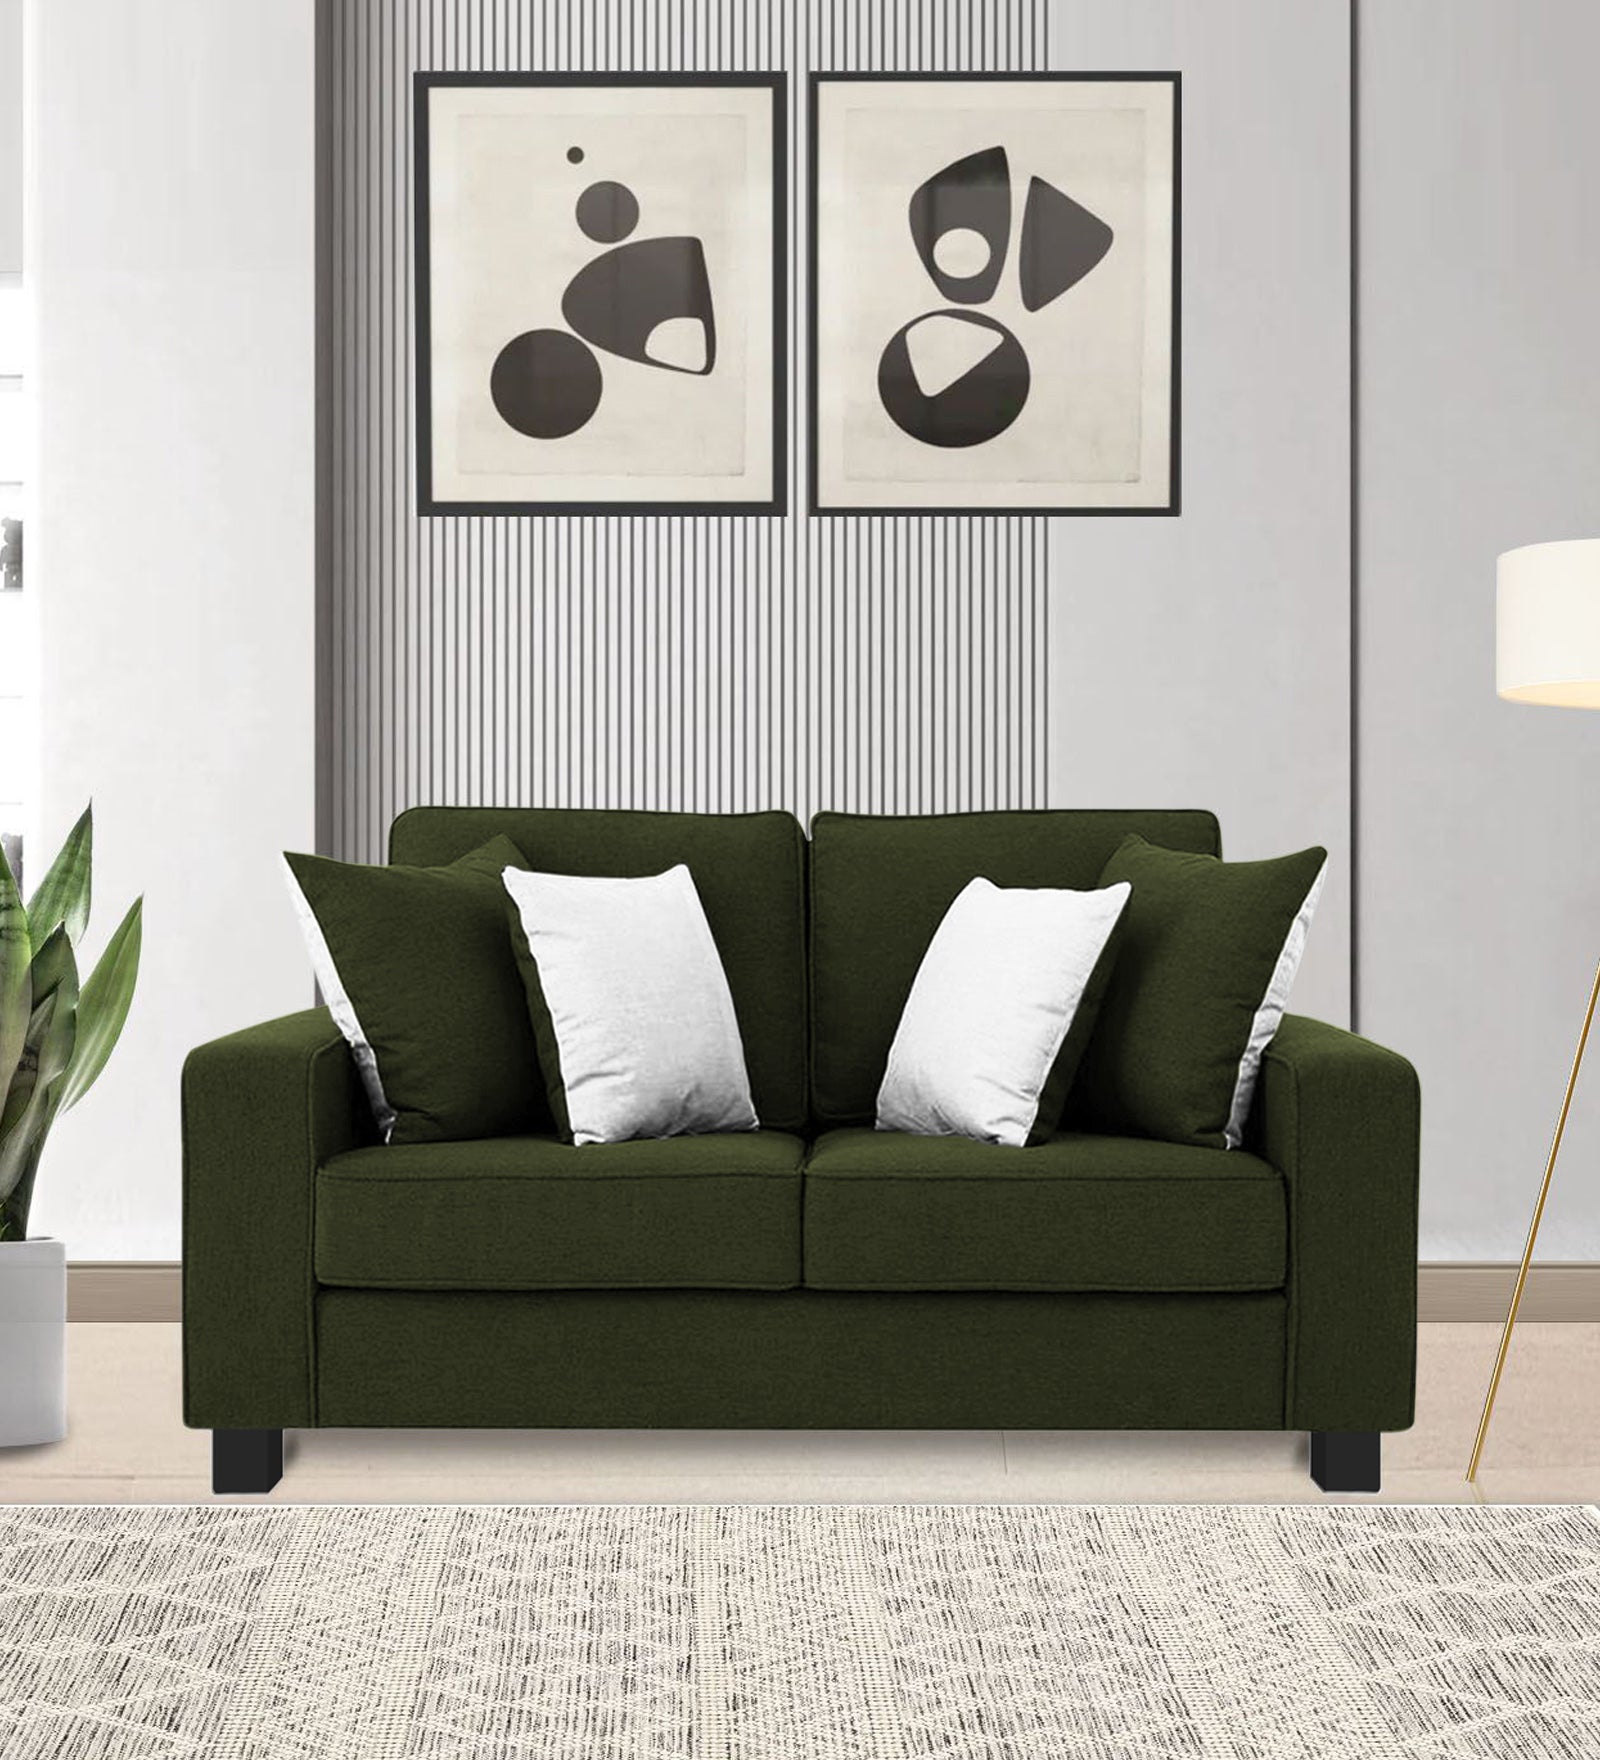 Ladybug Fabric 2 Seater Sofa In Olive Green Colour